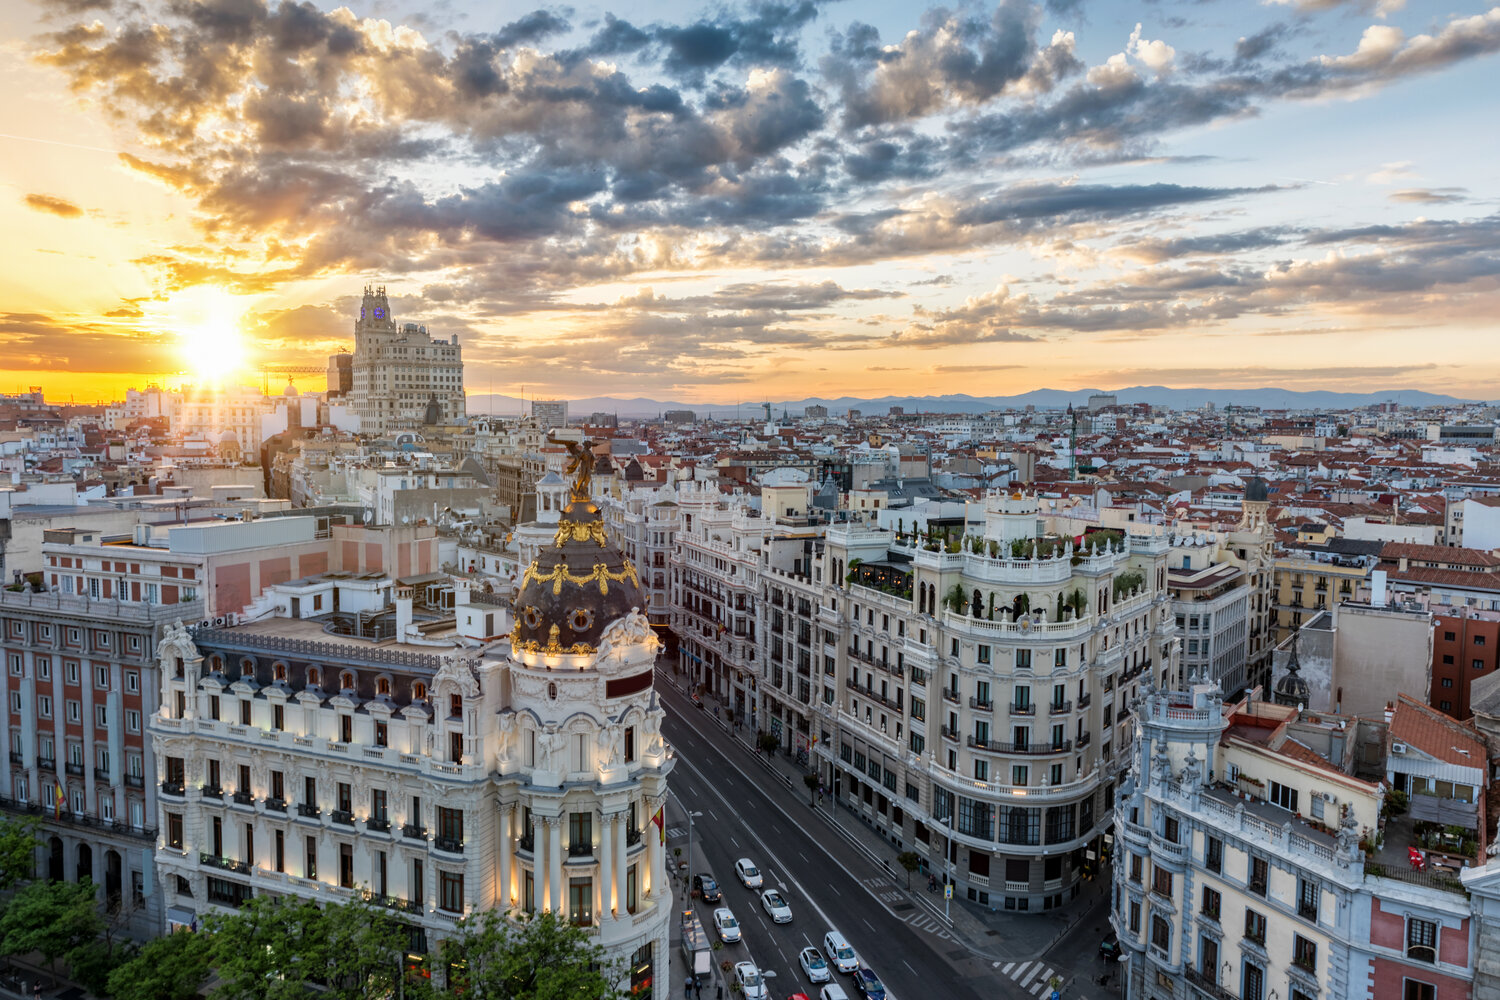 Summer travel: Madrid is strangely quiet but still a magical city